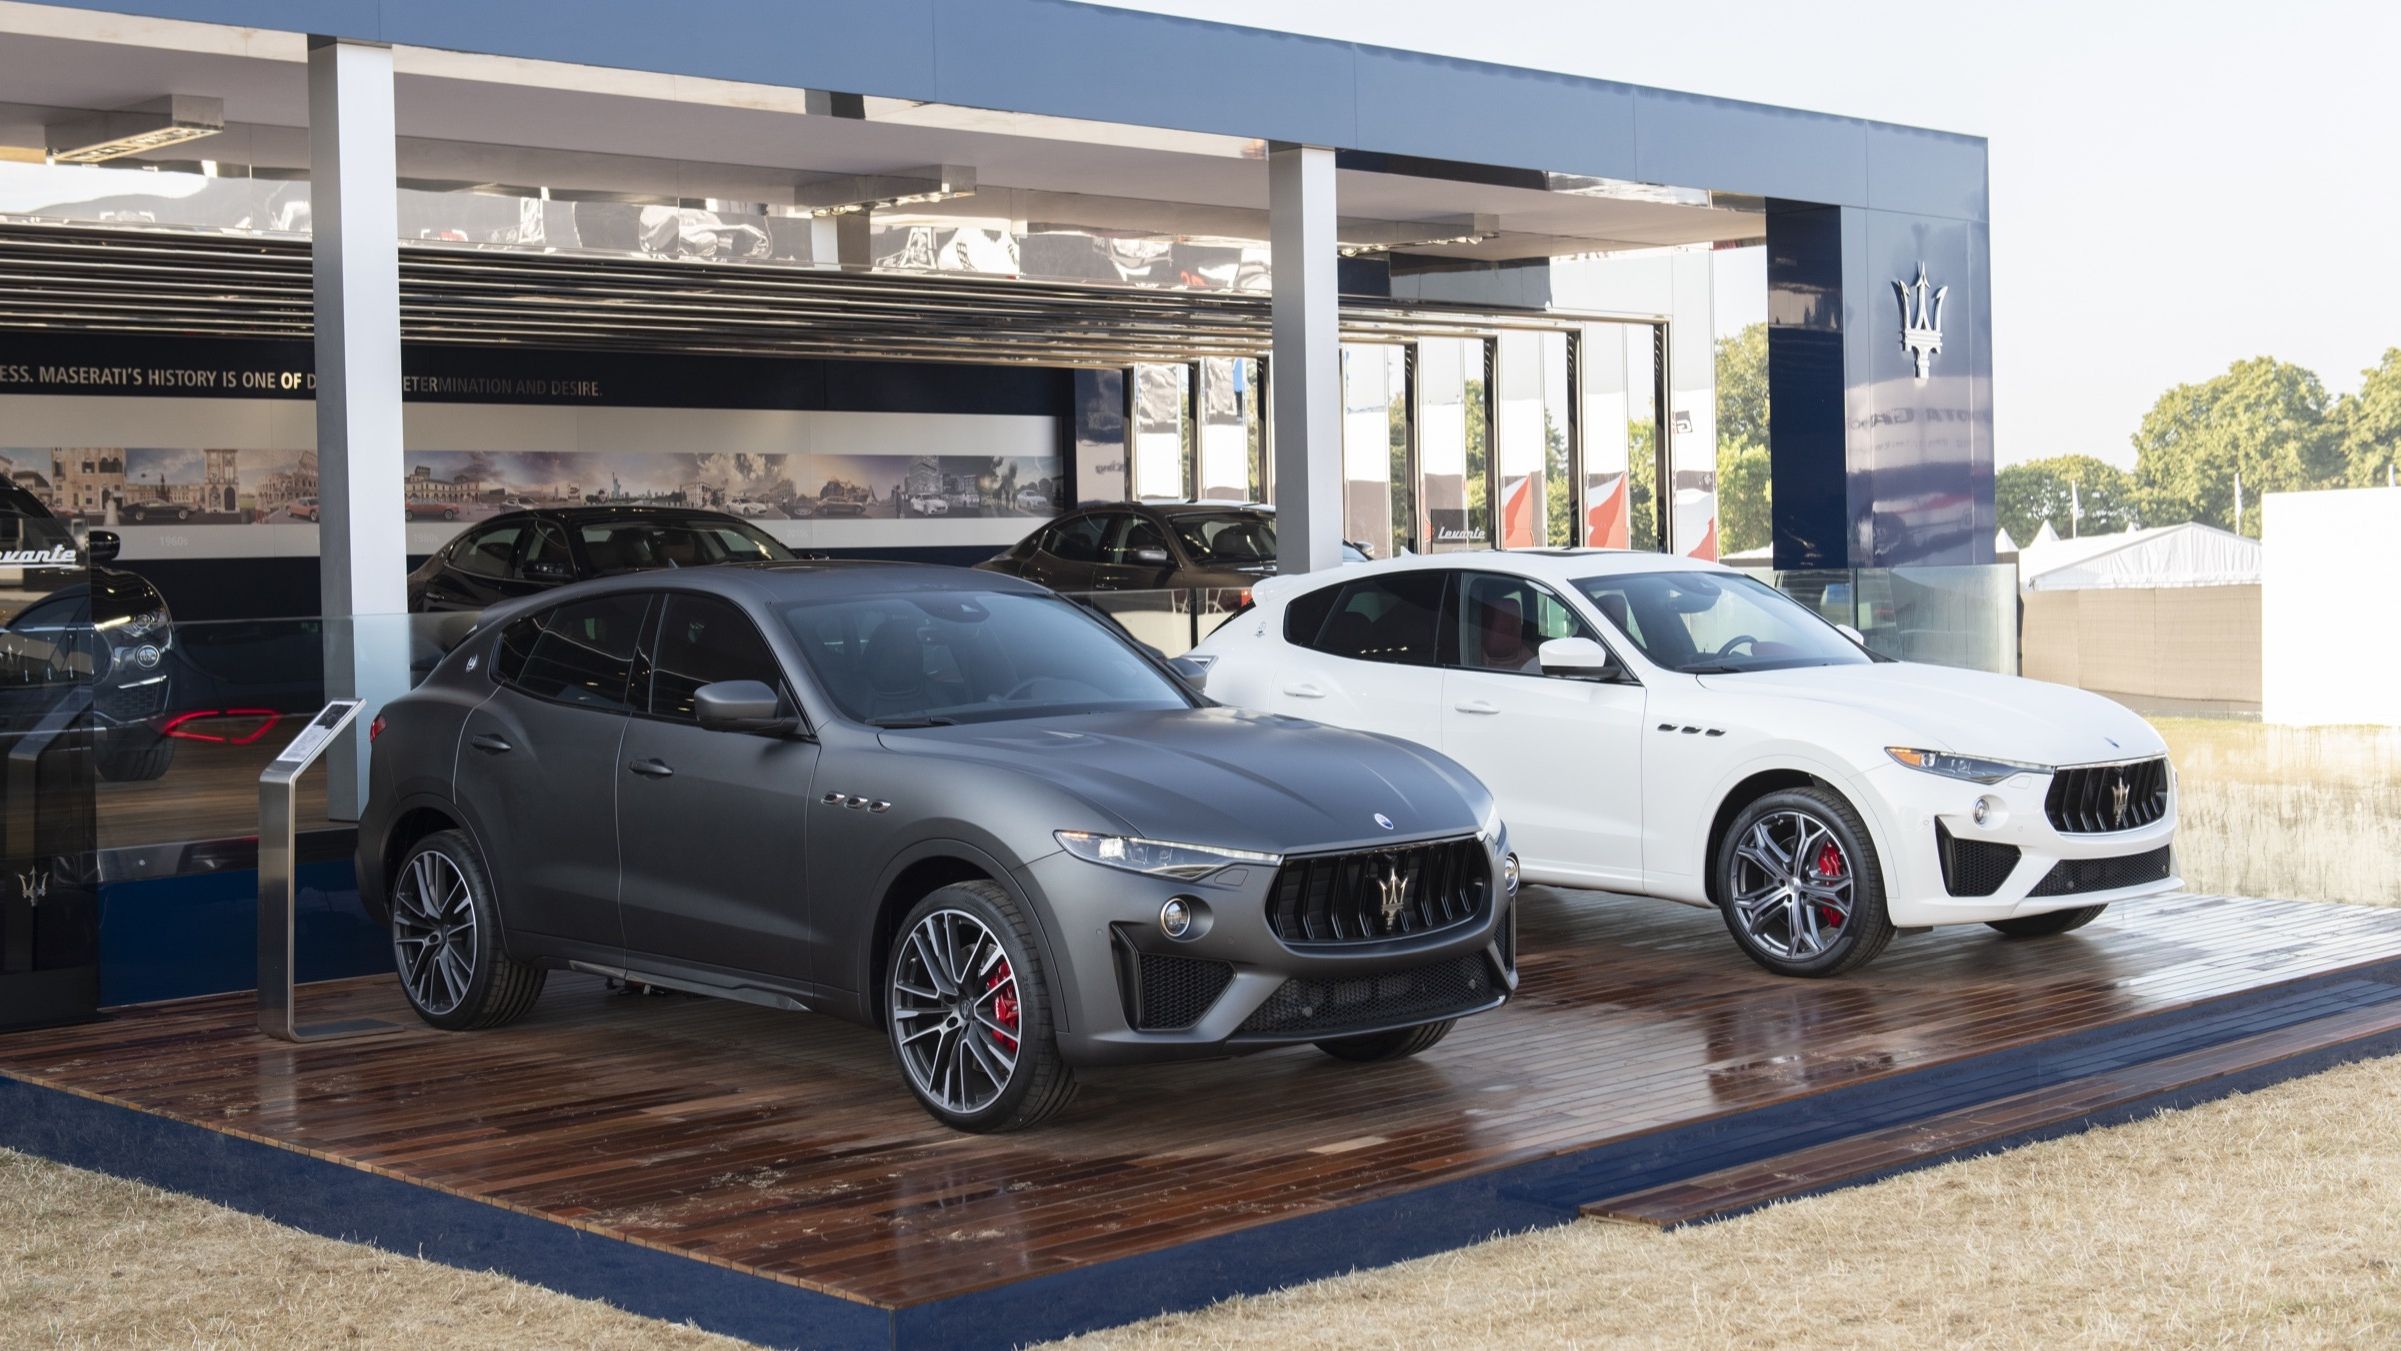 2019 Is There Any Meaningful Difference Between The Maserati Levante GTS And The Maserati Levante Trofeo?